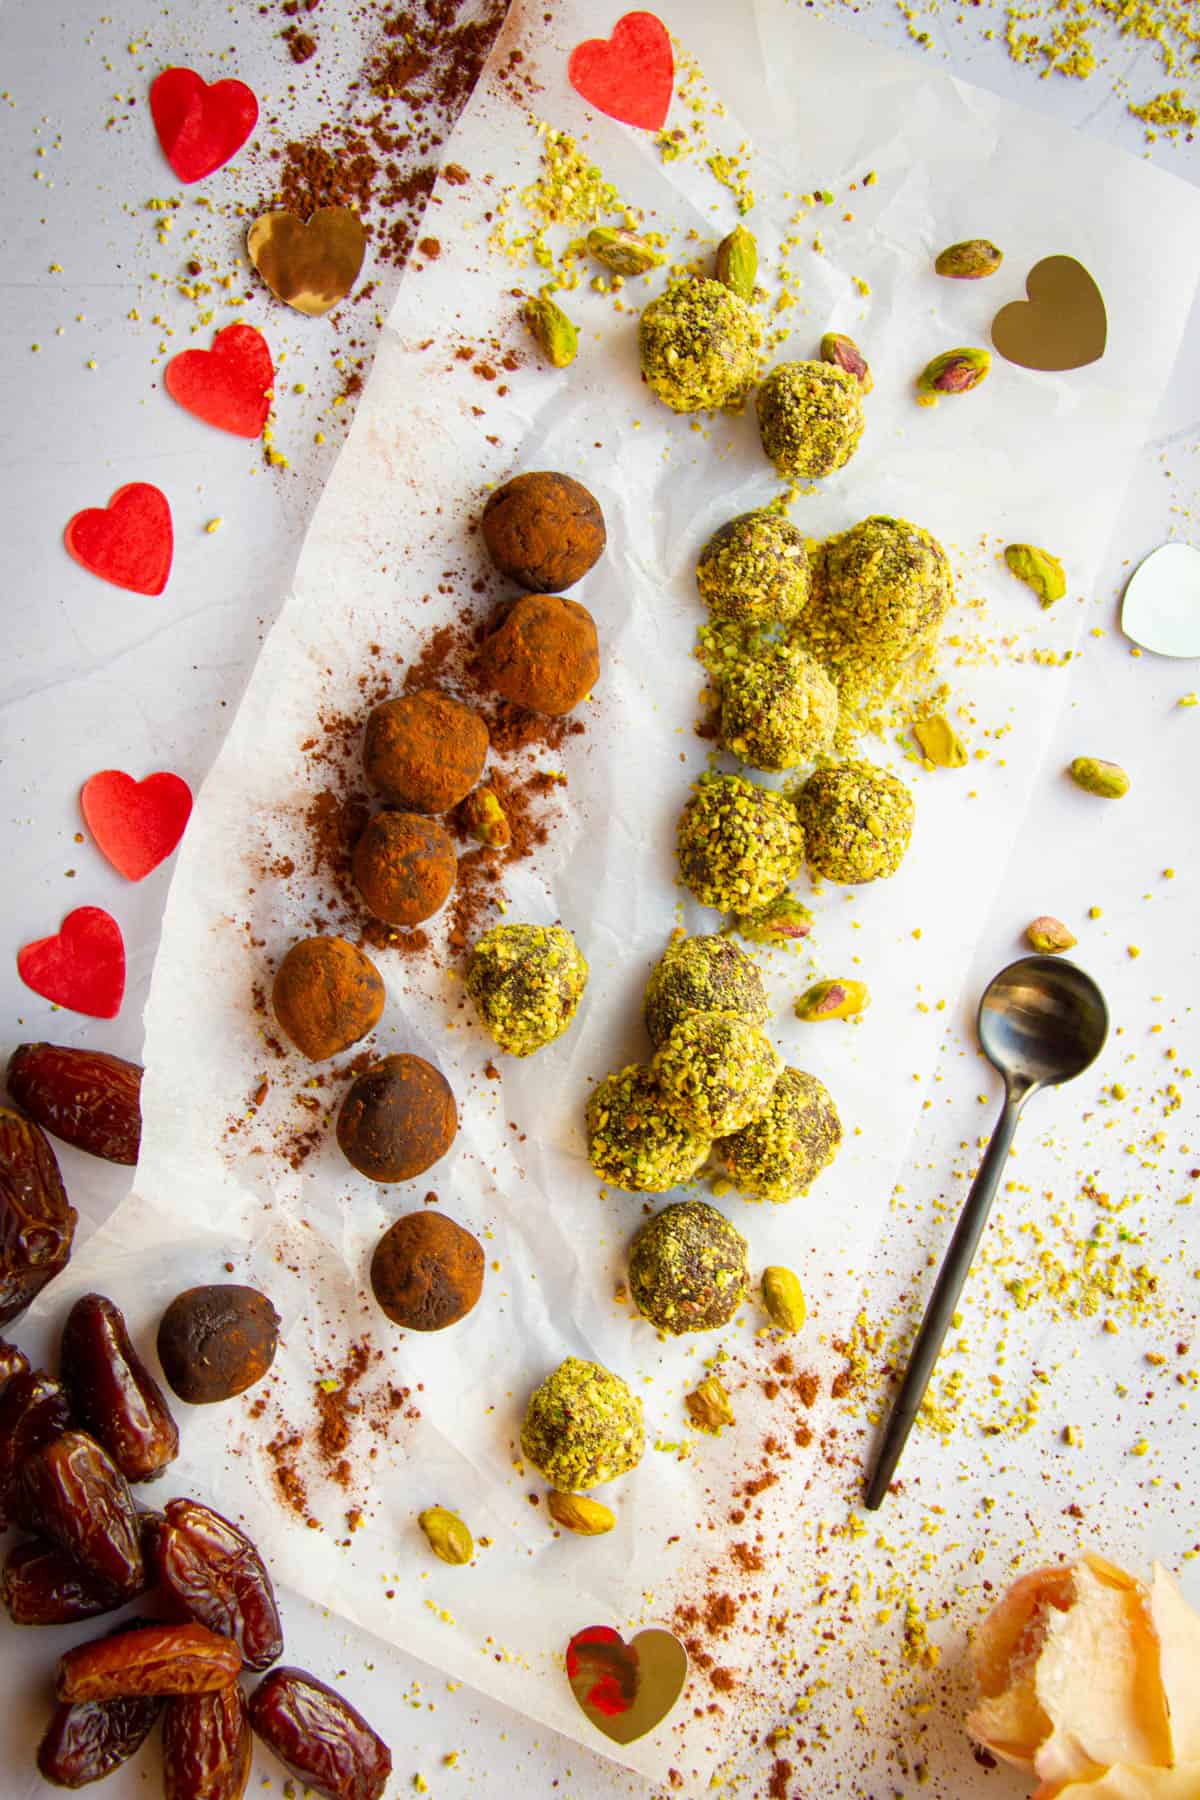 Vegan chocolate truffles lying on a table with hearts around.